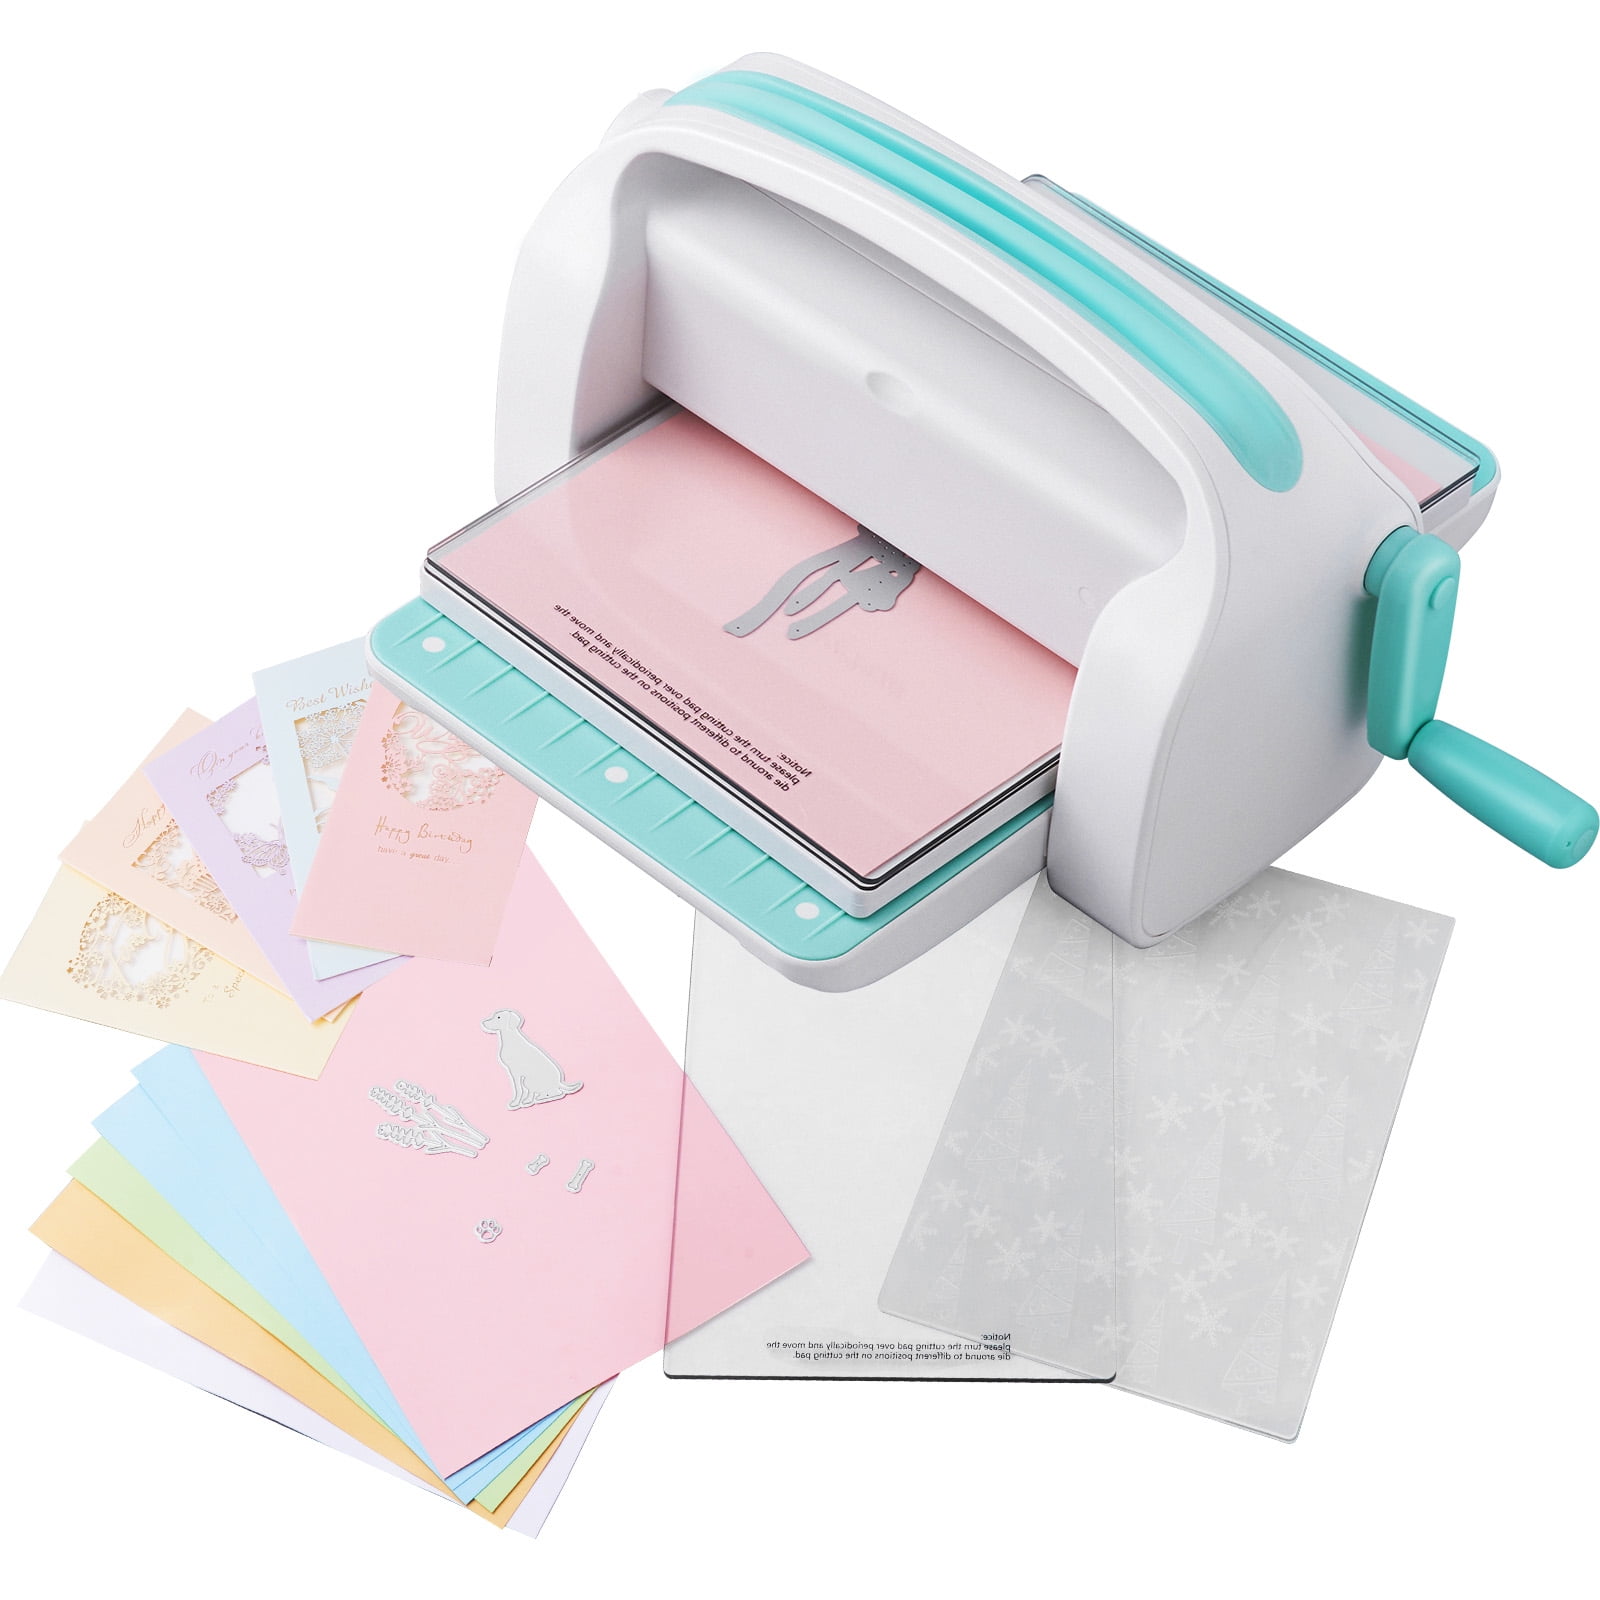 BENTISM Die Cutting & Embossing Machine for Arts & Crafts, 9 Portable  Manual Machine, Scrapbooking & Cardmaking Tools, Perfect for Invitations